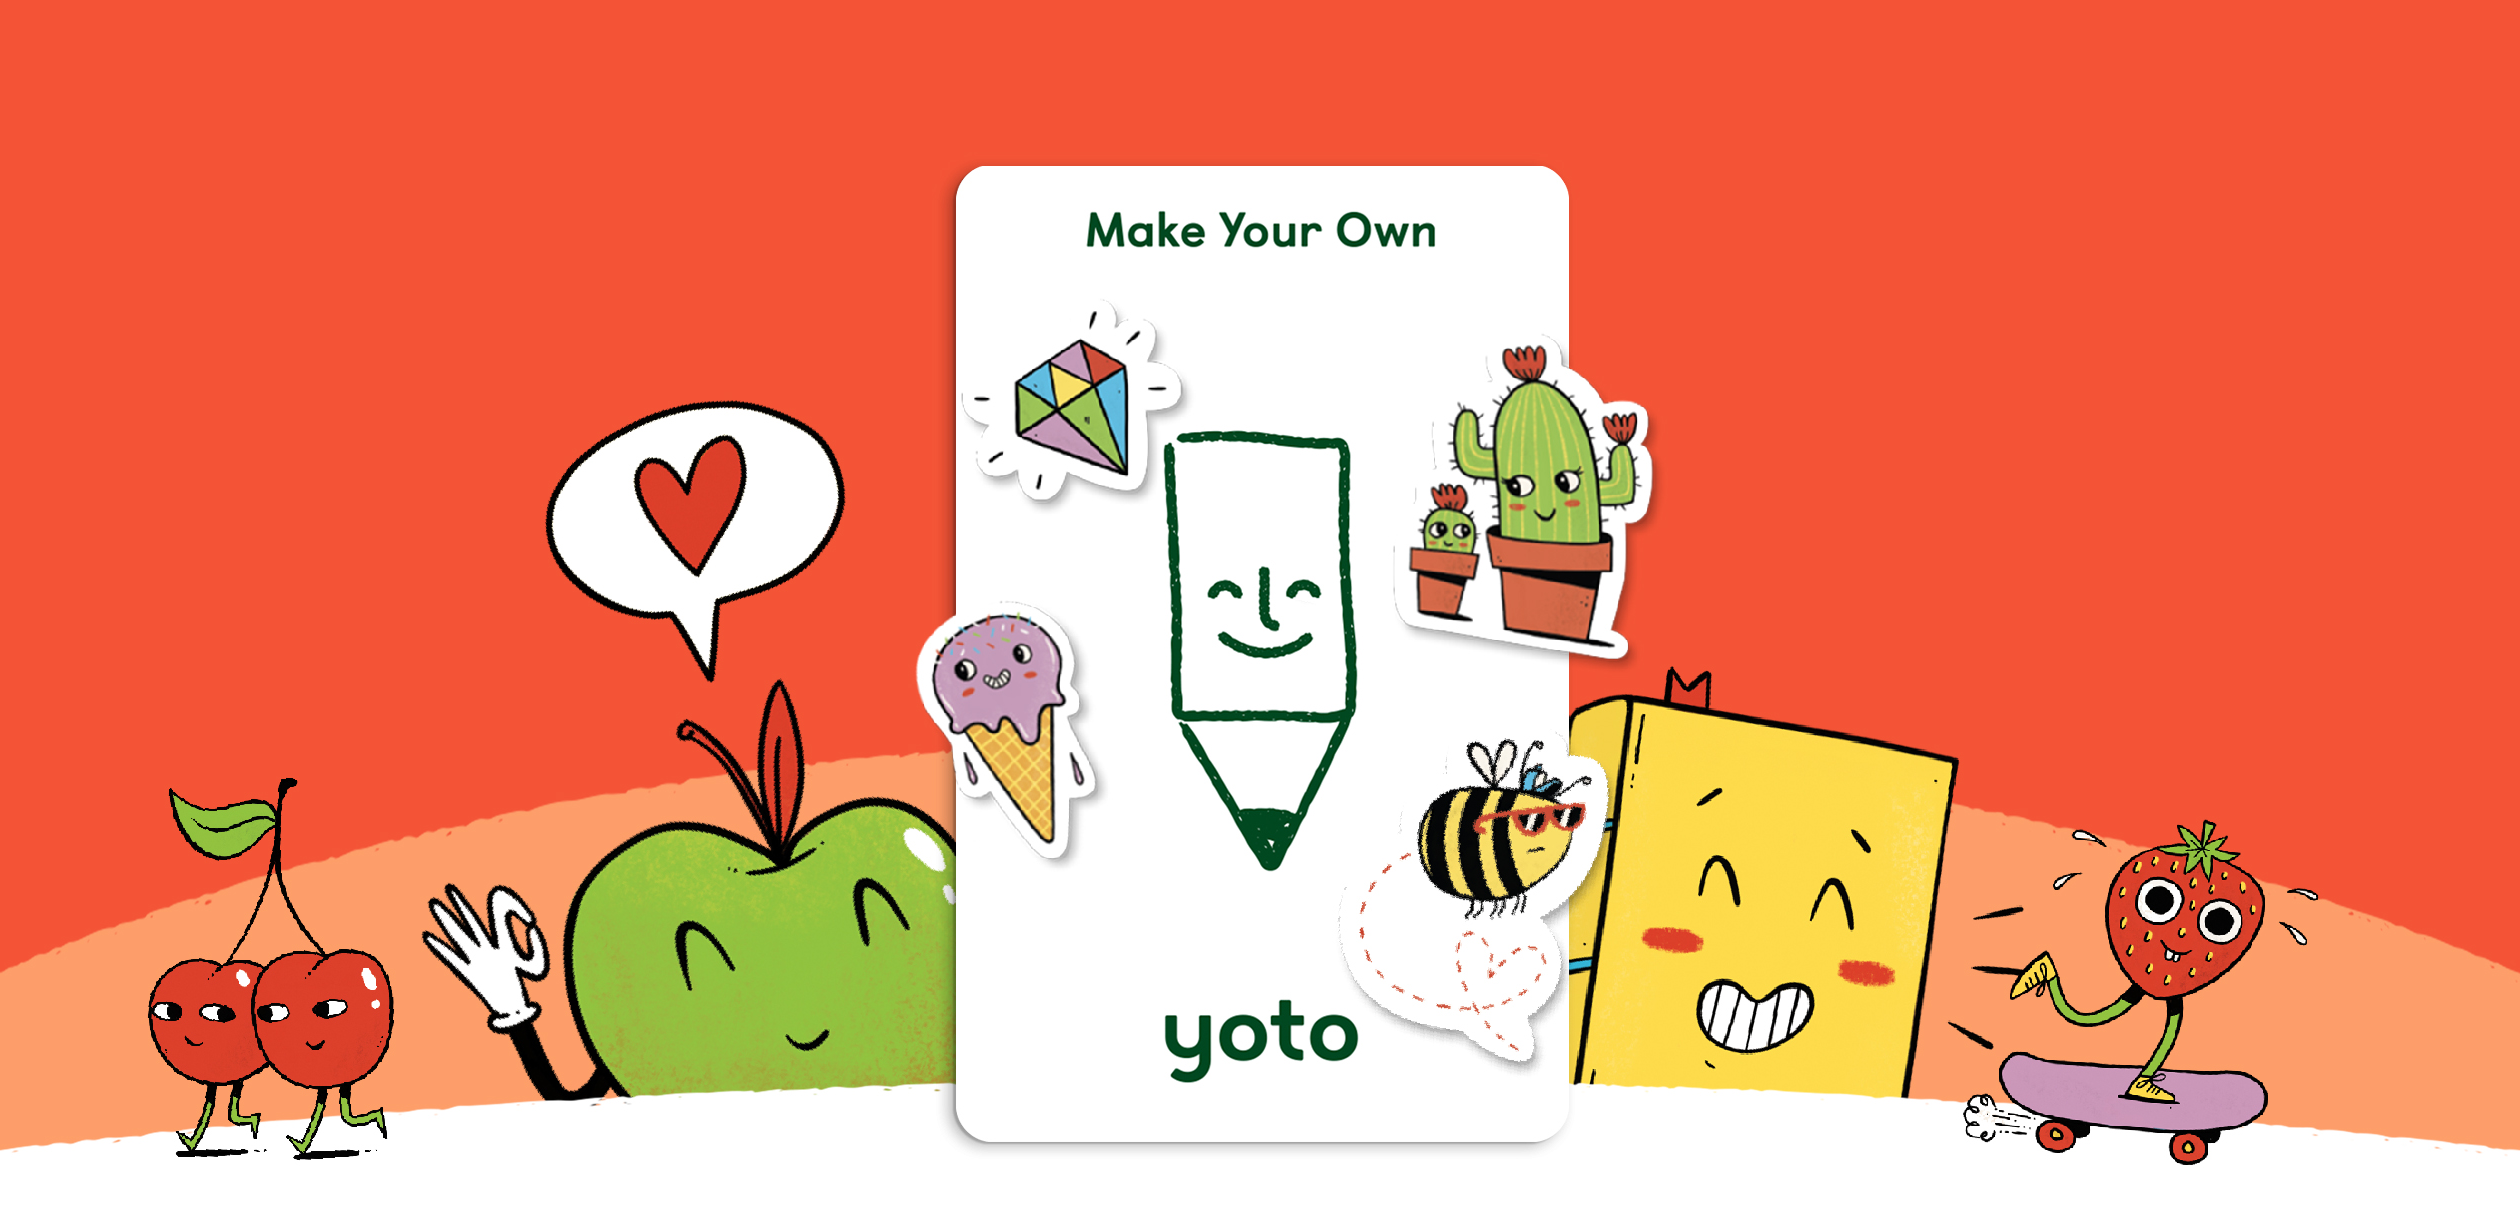 Yoto Make Your Own Blank Card with Sticker Artwork